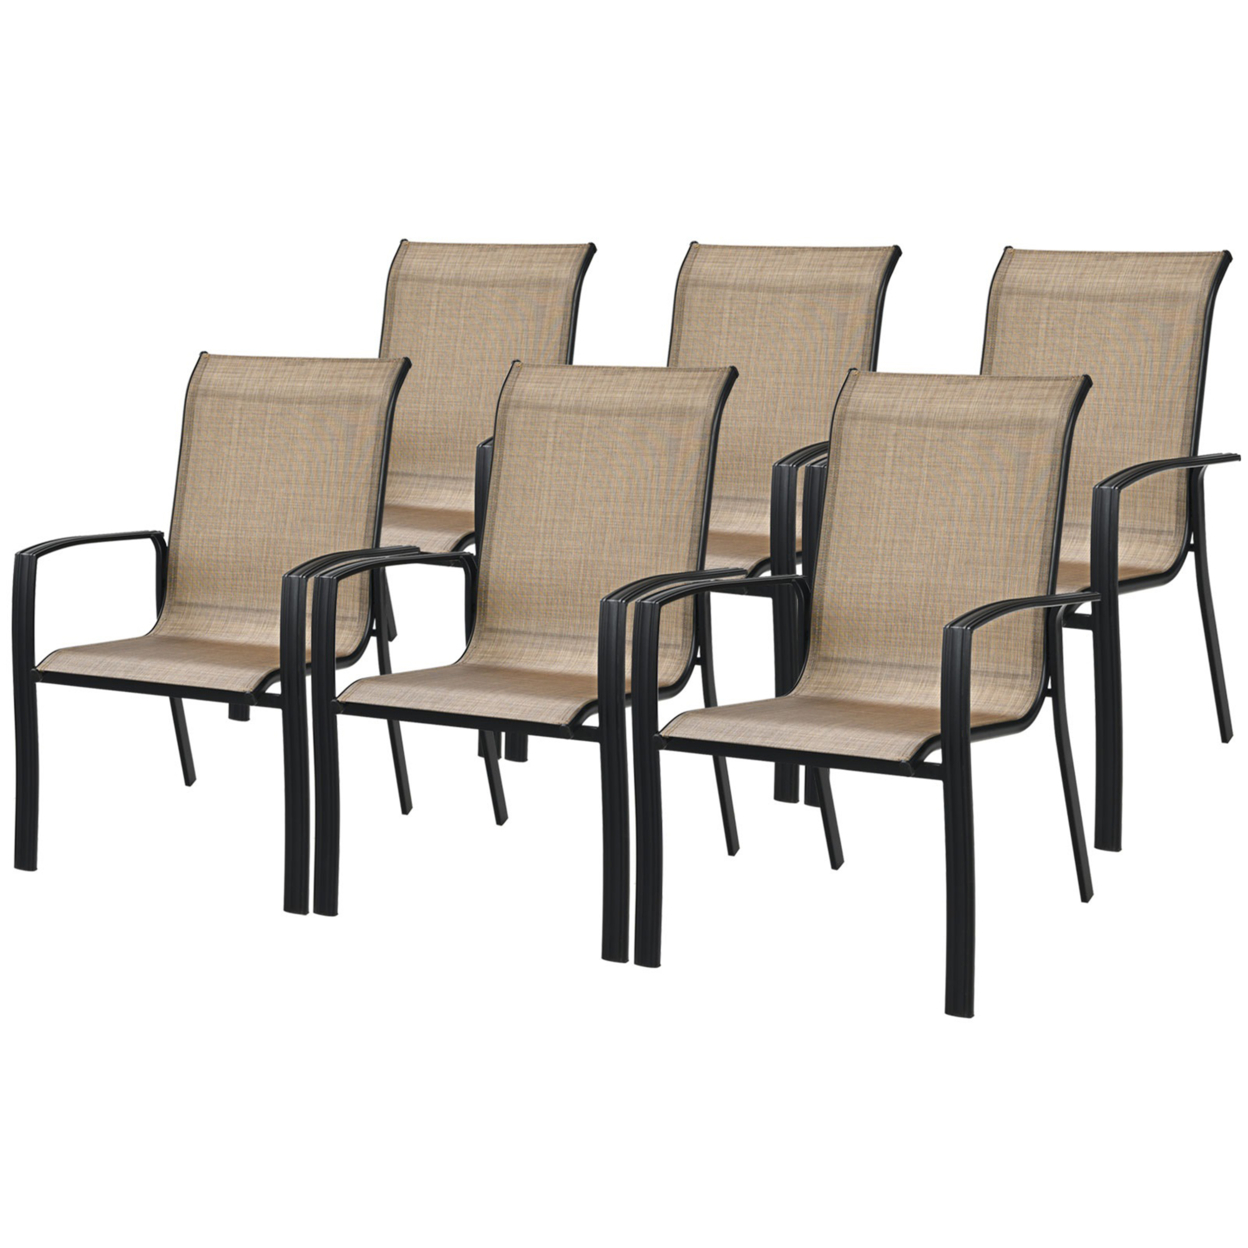 Outdoor Stackable Dining Chair Patio Armchair W/ Breathable Fabric - Brown, 16 Pcs